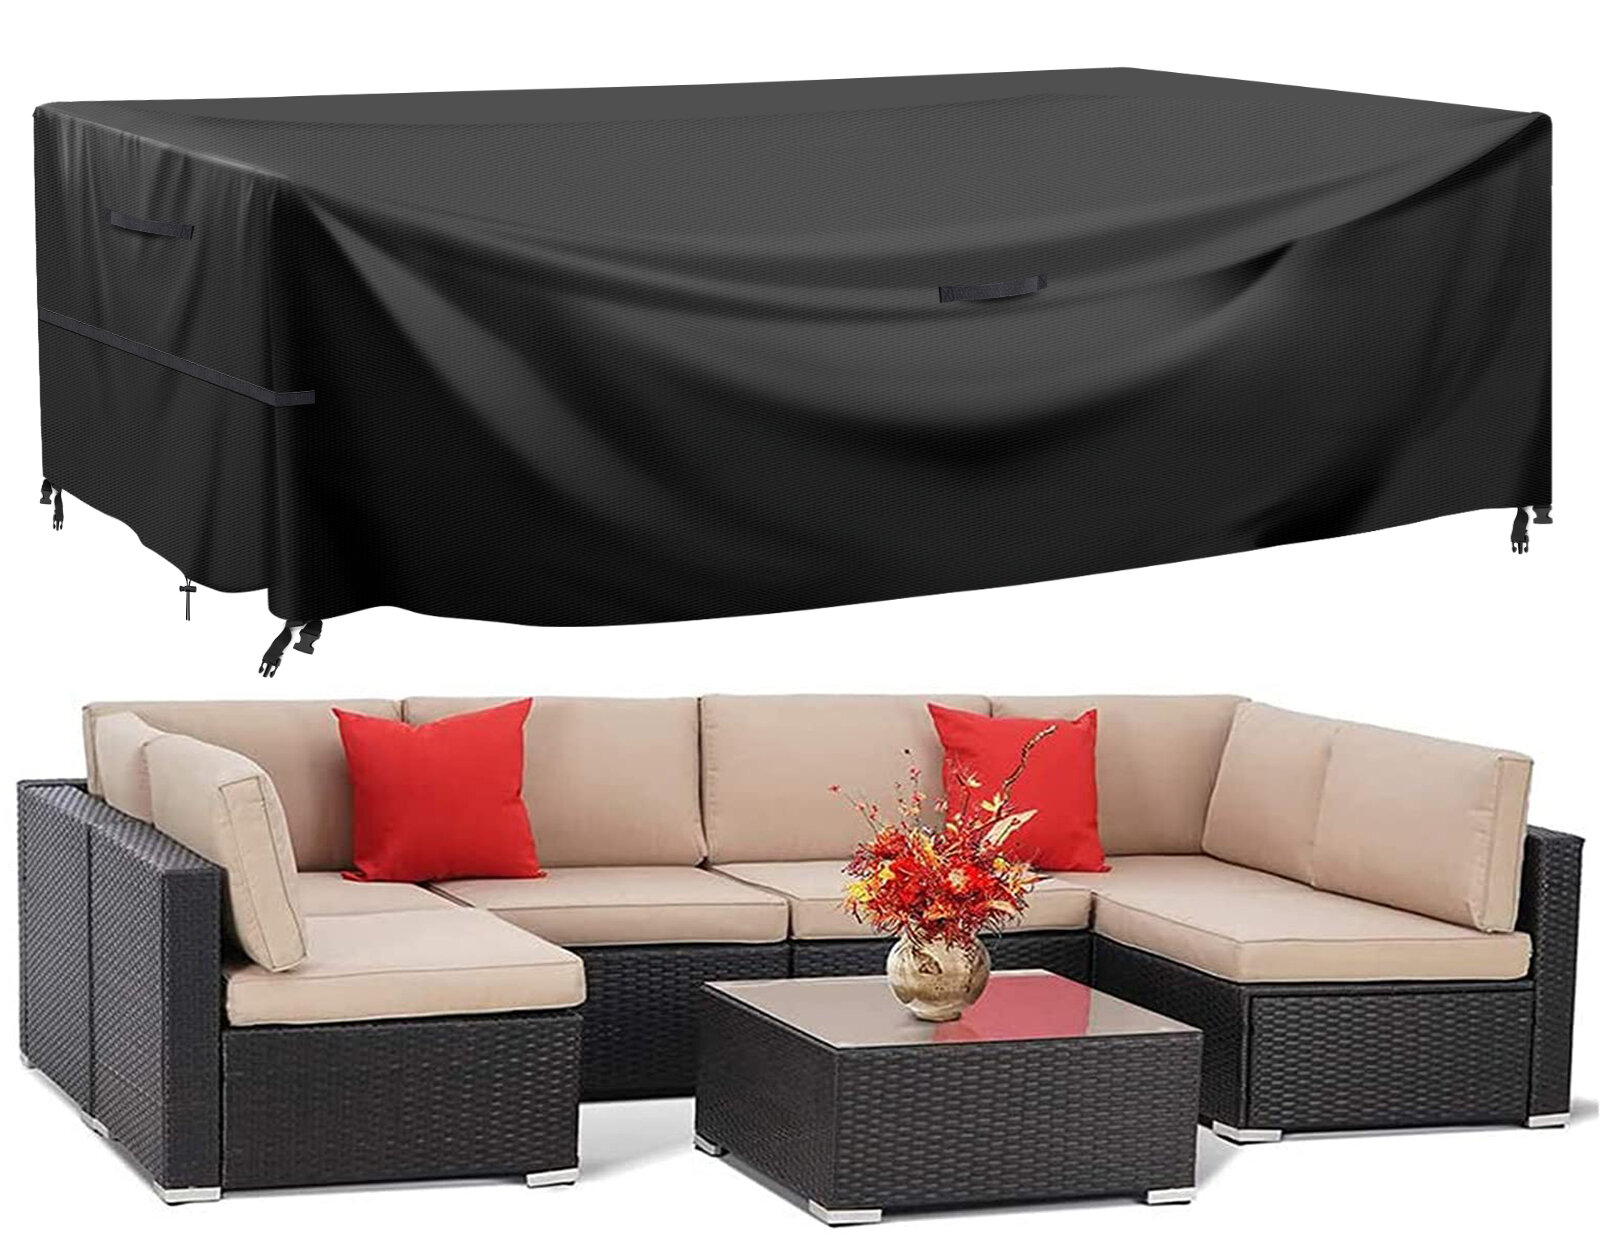 KING DO WAY 242x182x100CM 600D Oxford Camping Furniture Covers Sofa Table Anti-UV Dust-proof Protector Fits to 8-10 Seat Garden Piano